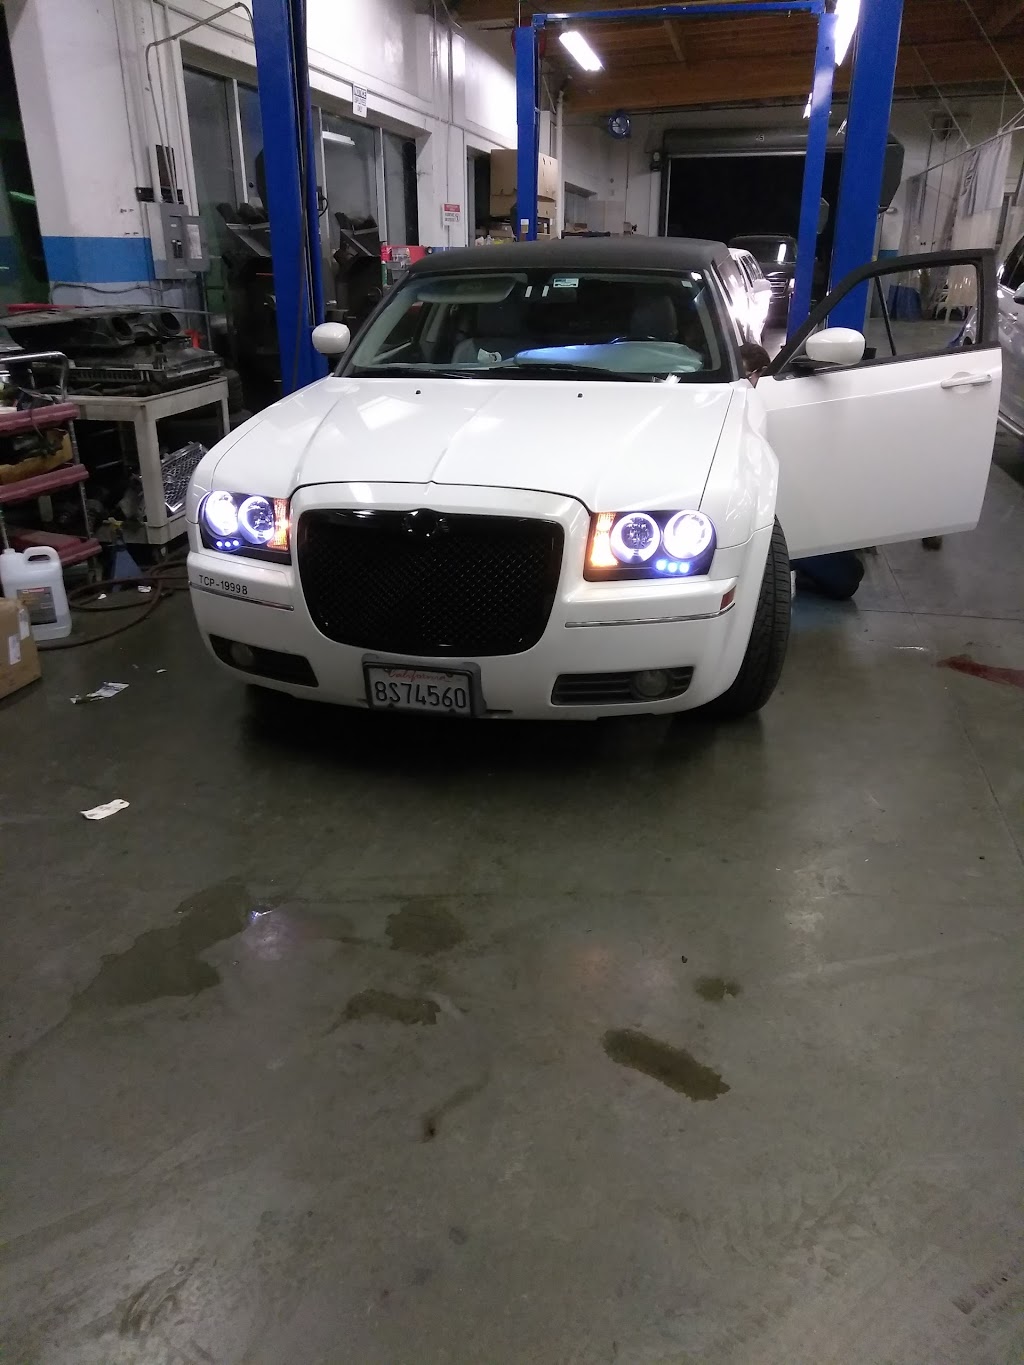 Bay Area Limousine Repair | 421 S Canal St, South San Francisco, CA 94080 | Phone: (650) 872-9600